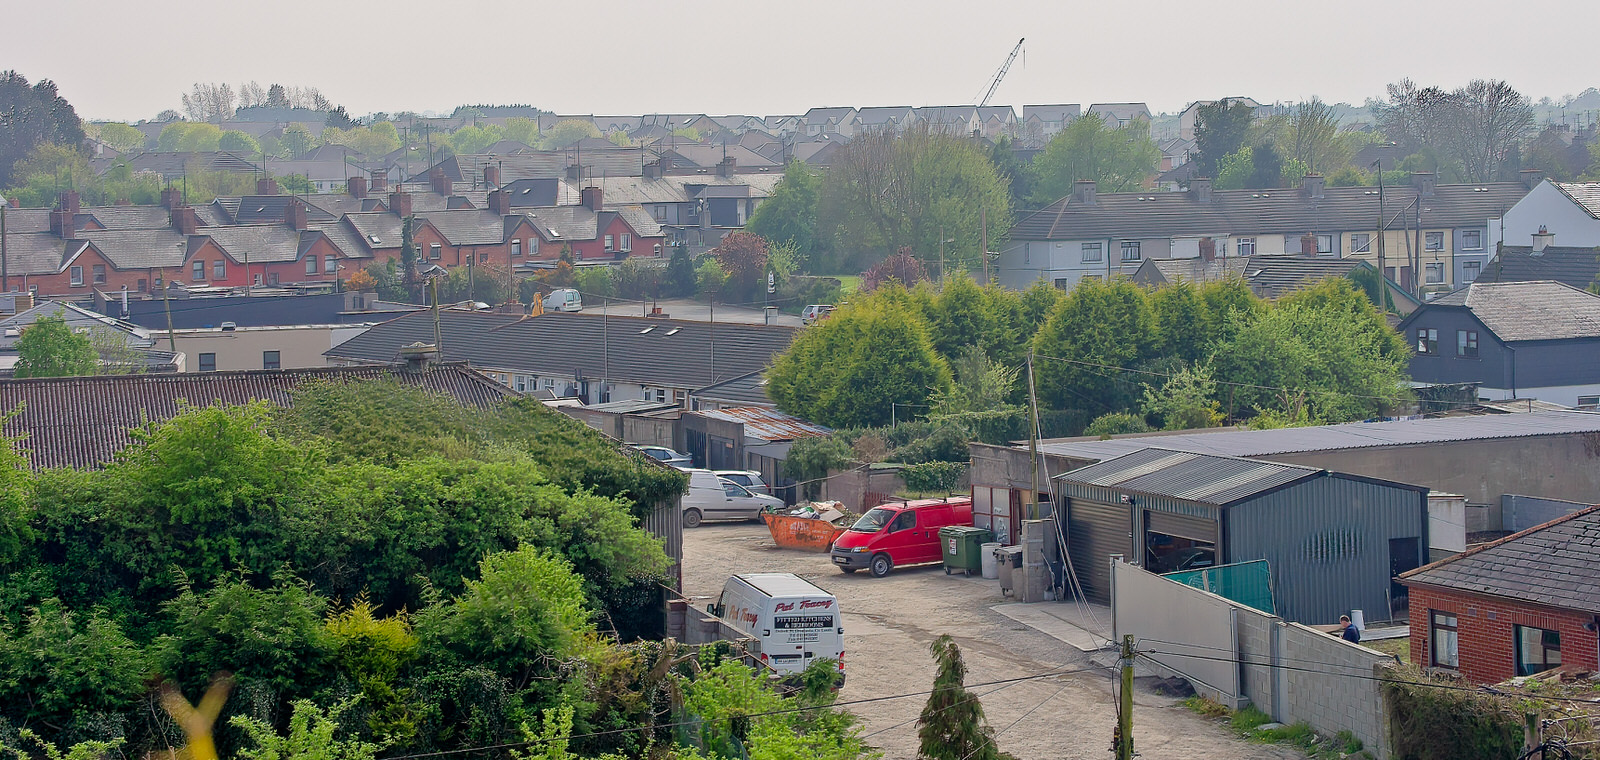 PANORAMIC VIEWS OF DROGHEDA AS IT WAS WAS IN 2011 [PRODUCED USING SONY NEX-5 PANORAMA MODE] 005